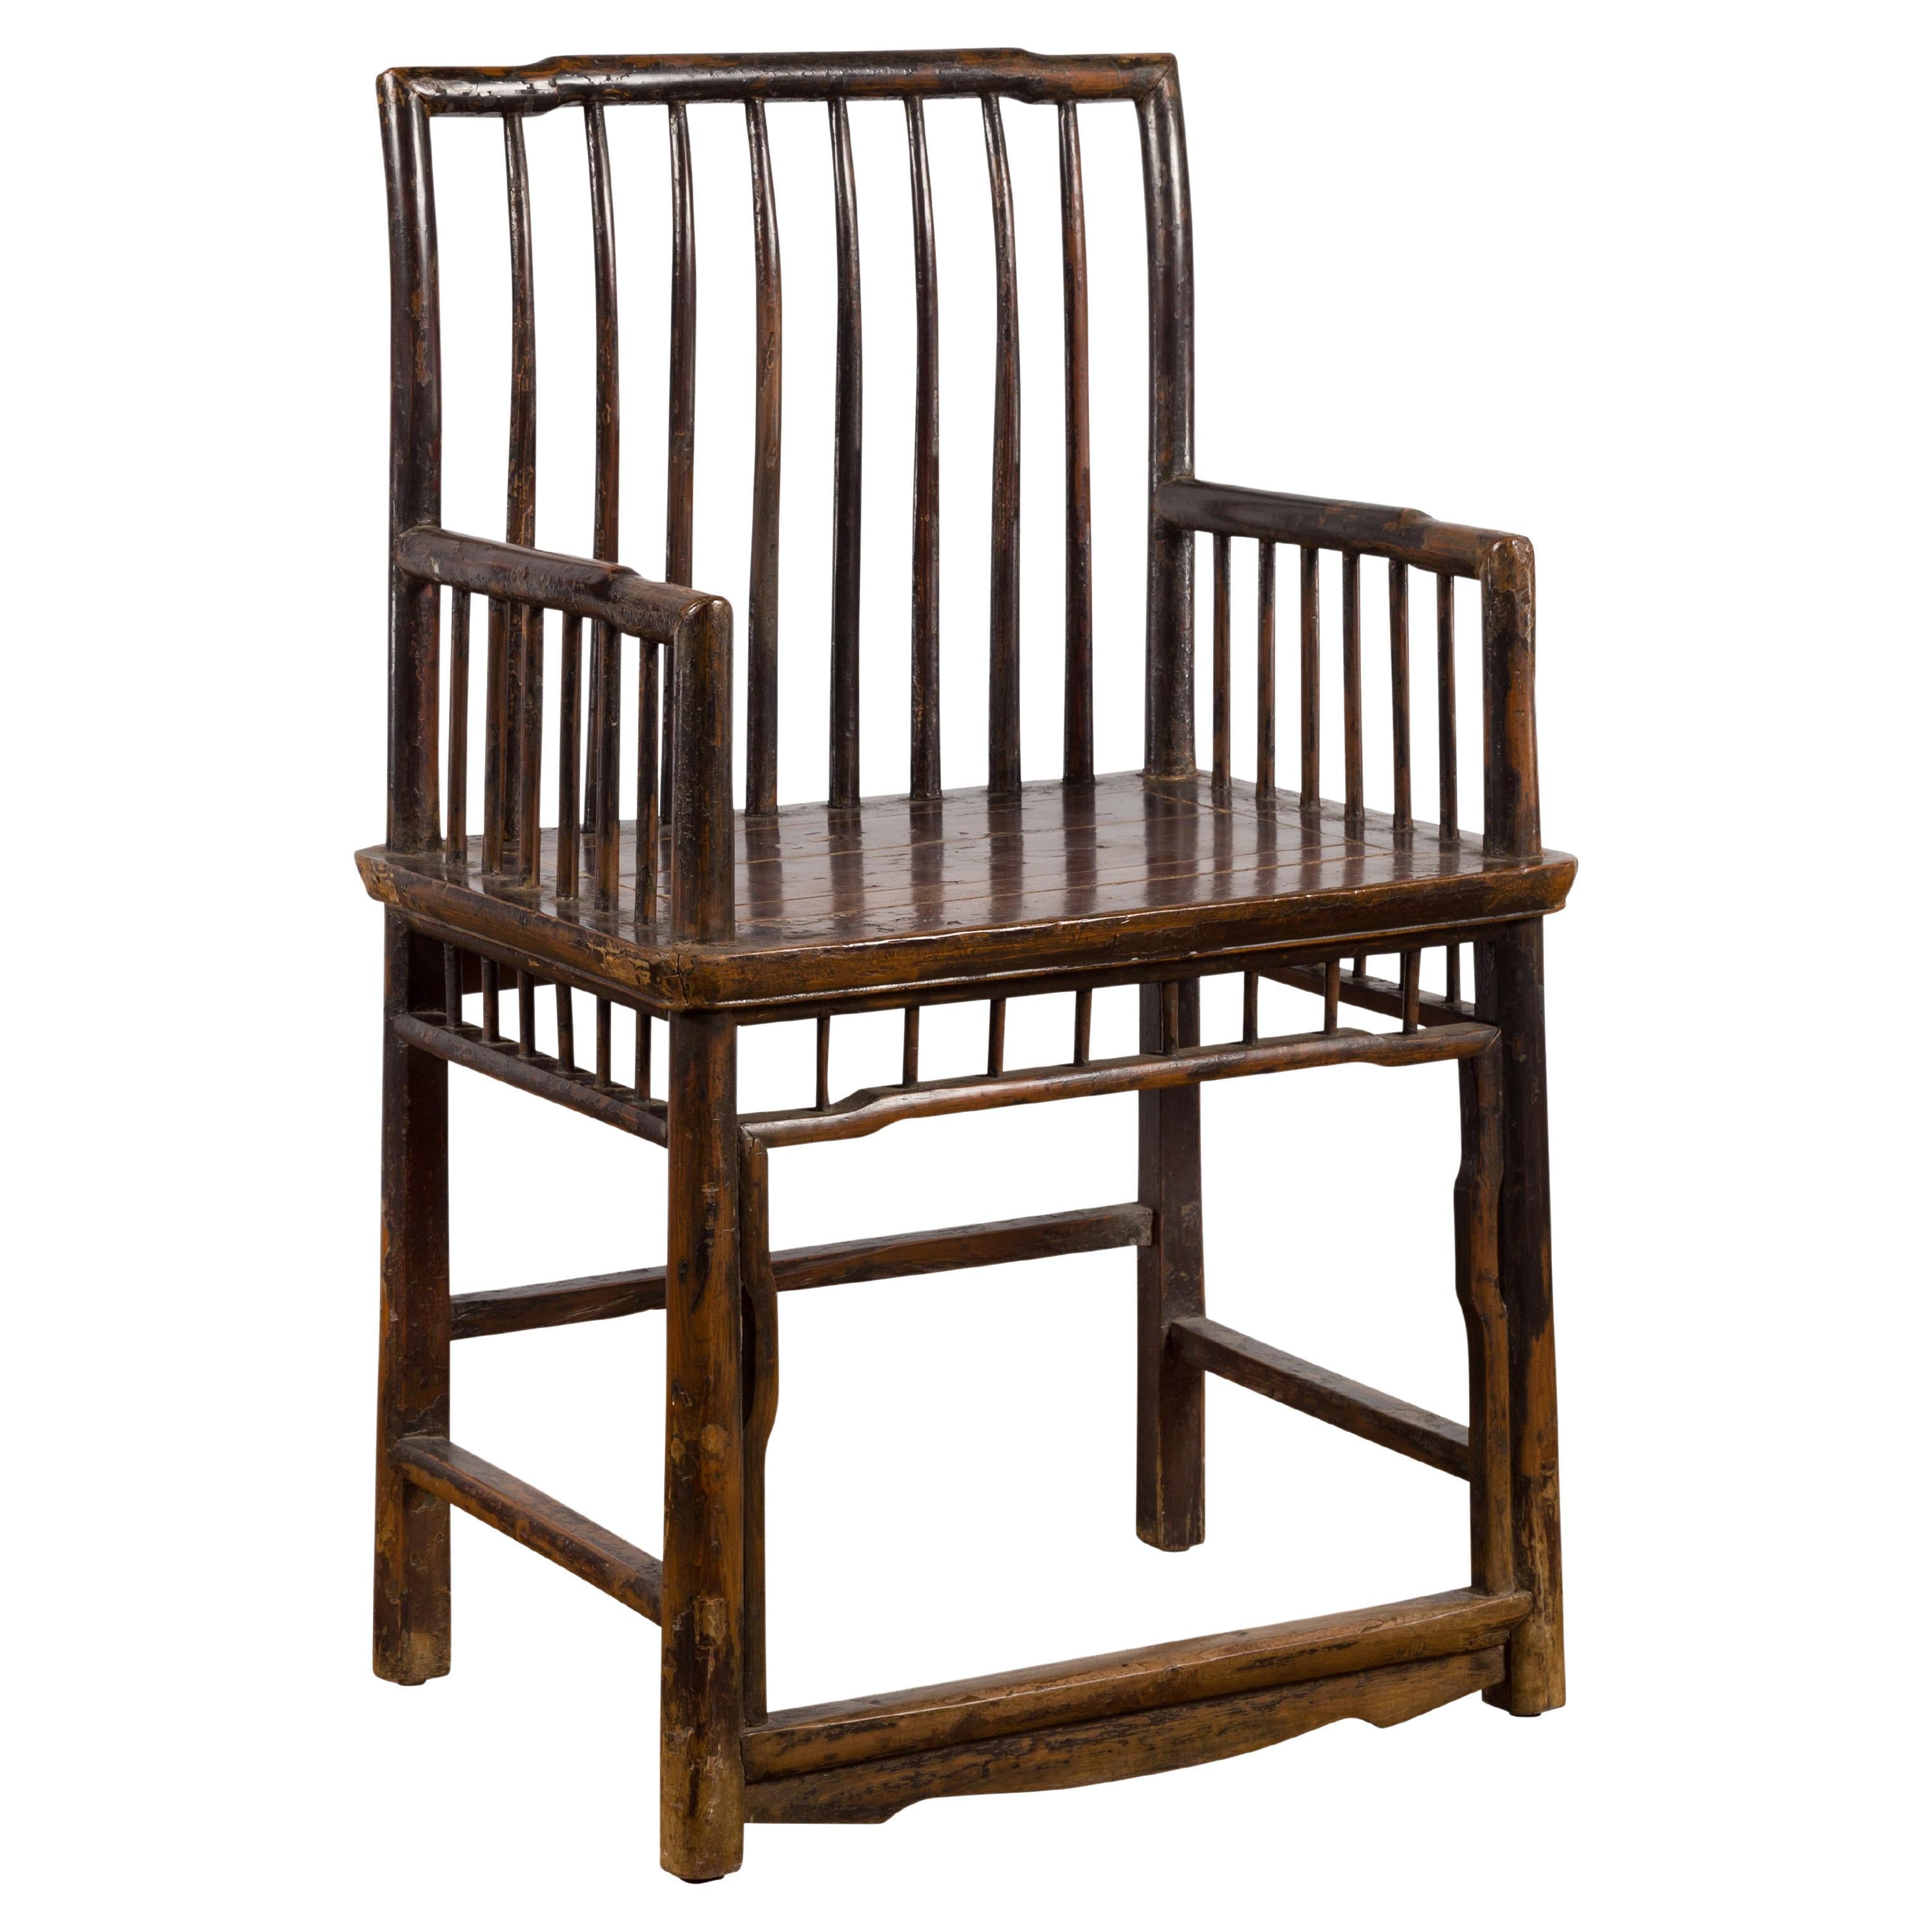 Chinese Qing Dynasty 19th Century Elmwood Armchair with Slatted Back and Arms For Sale